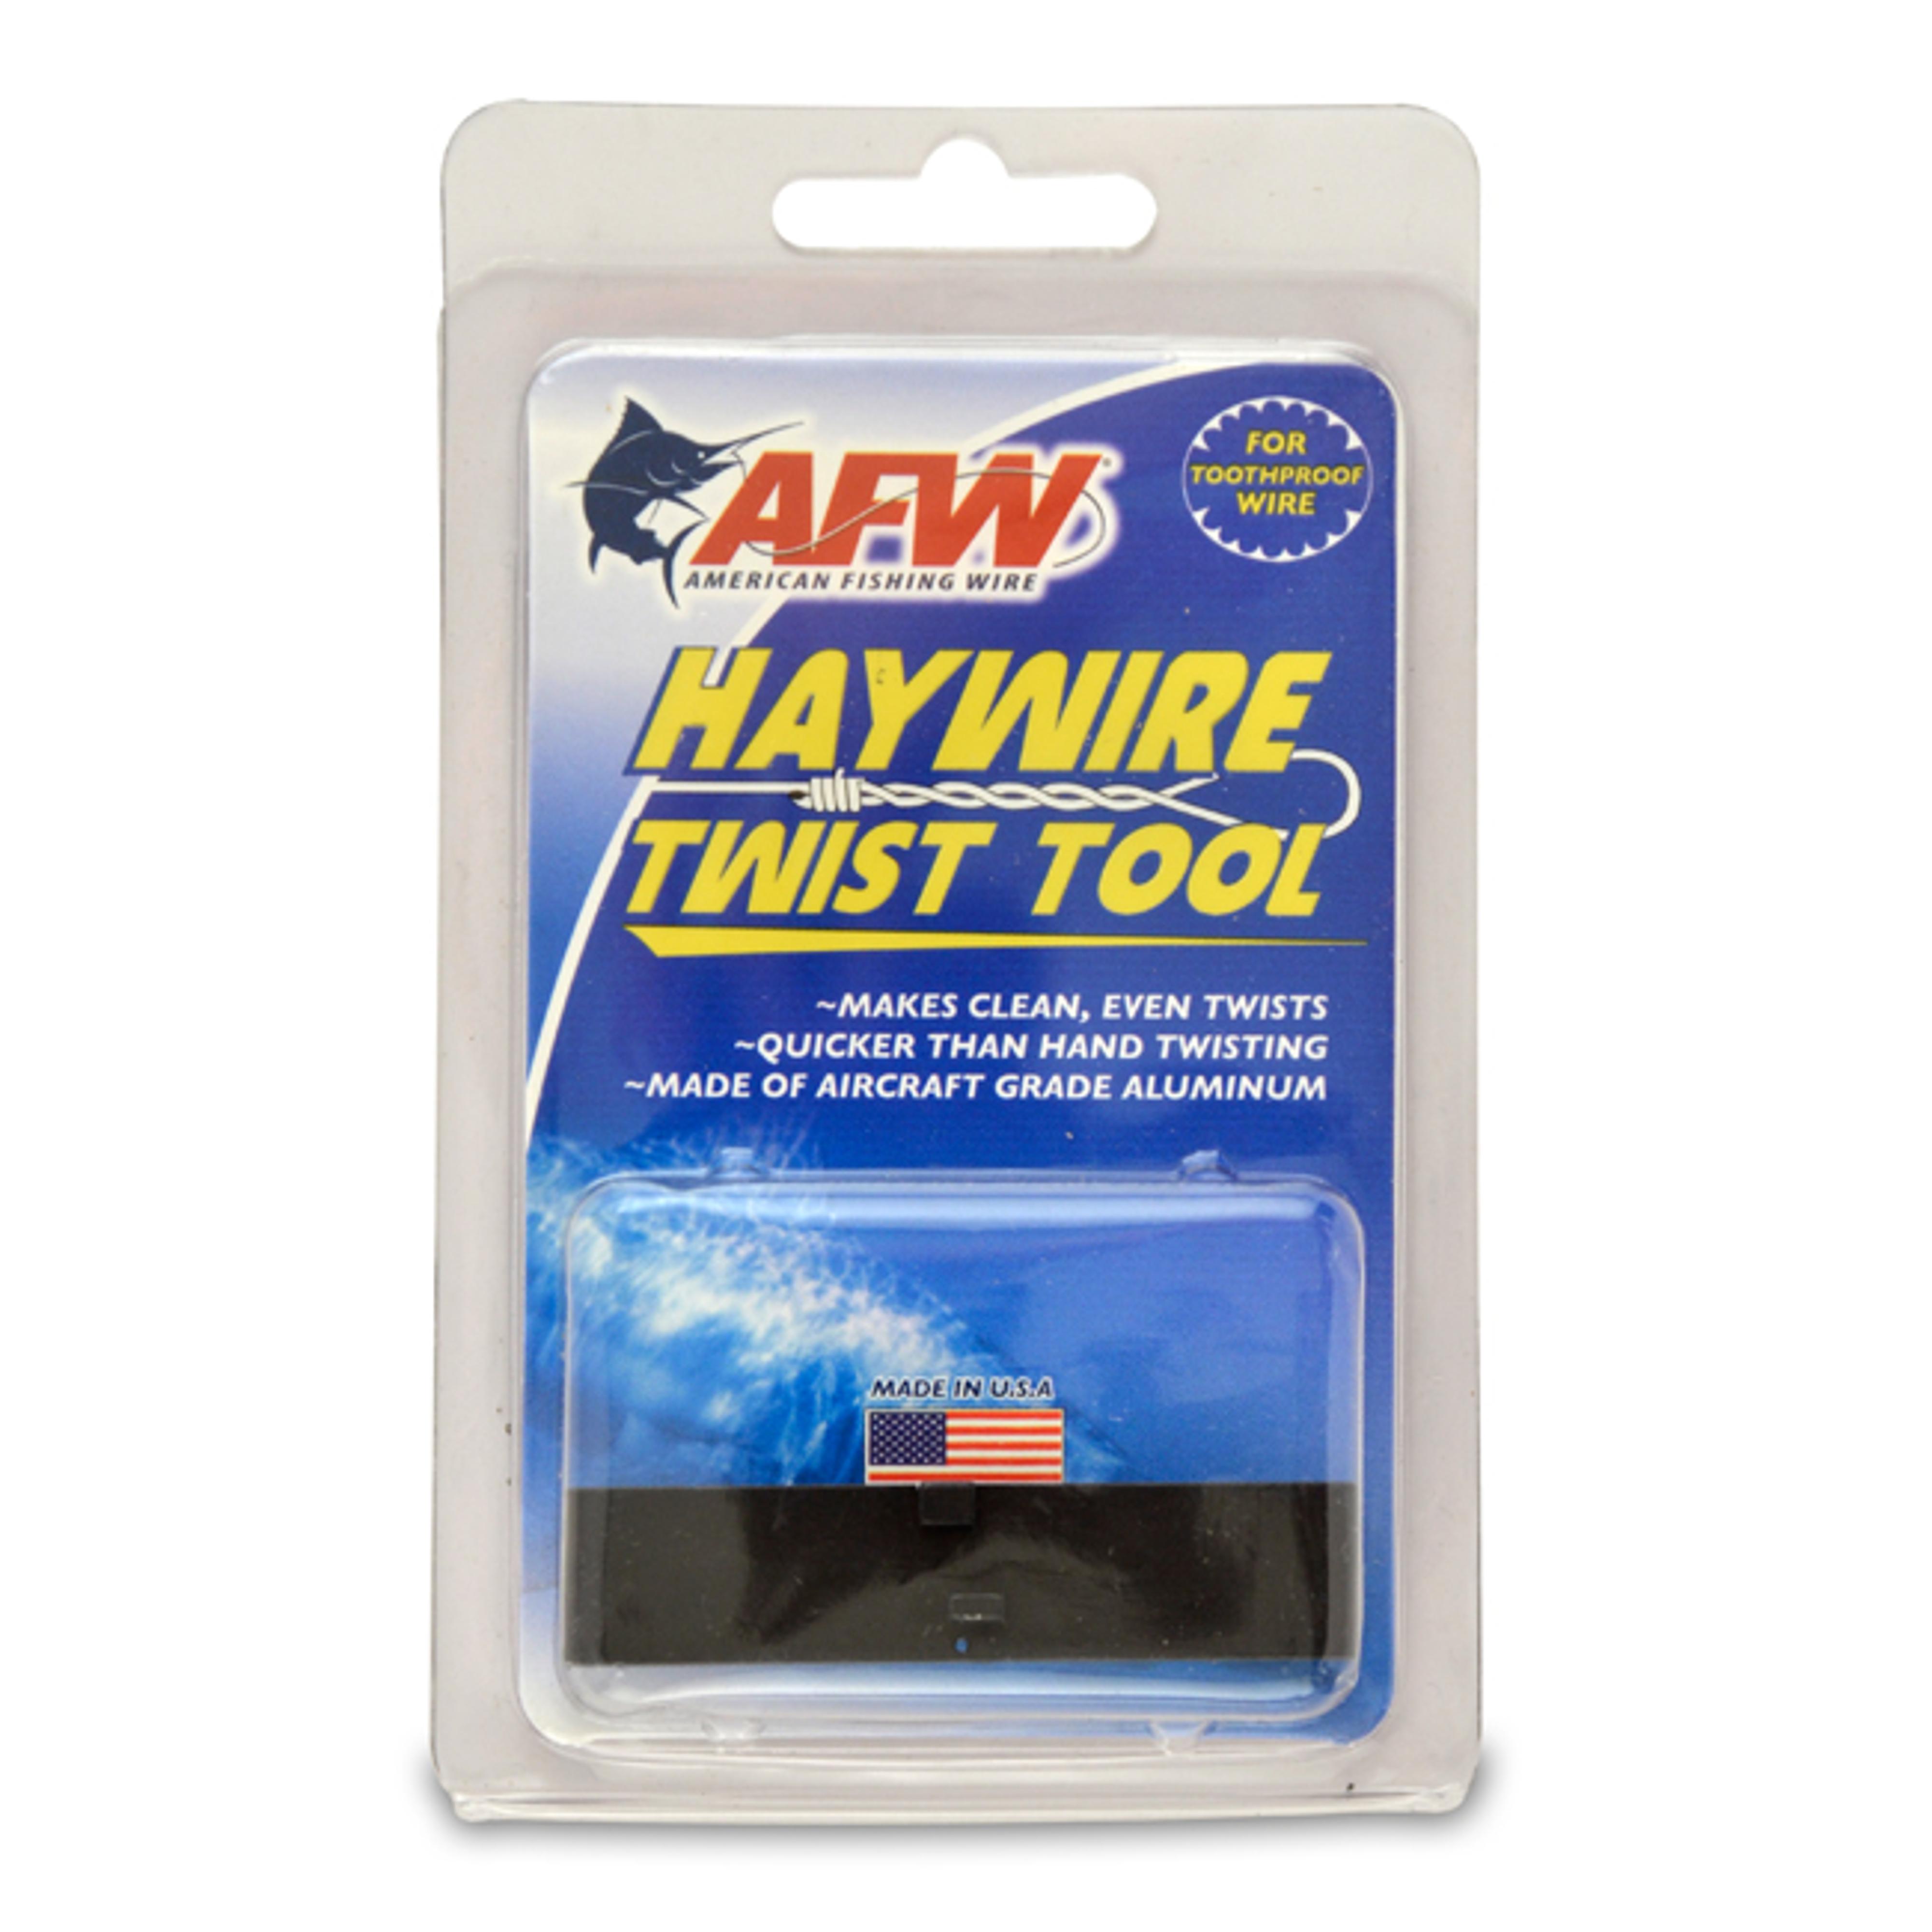 Haywire Twist Tool: Fishermans Ideal Supply House